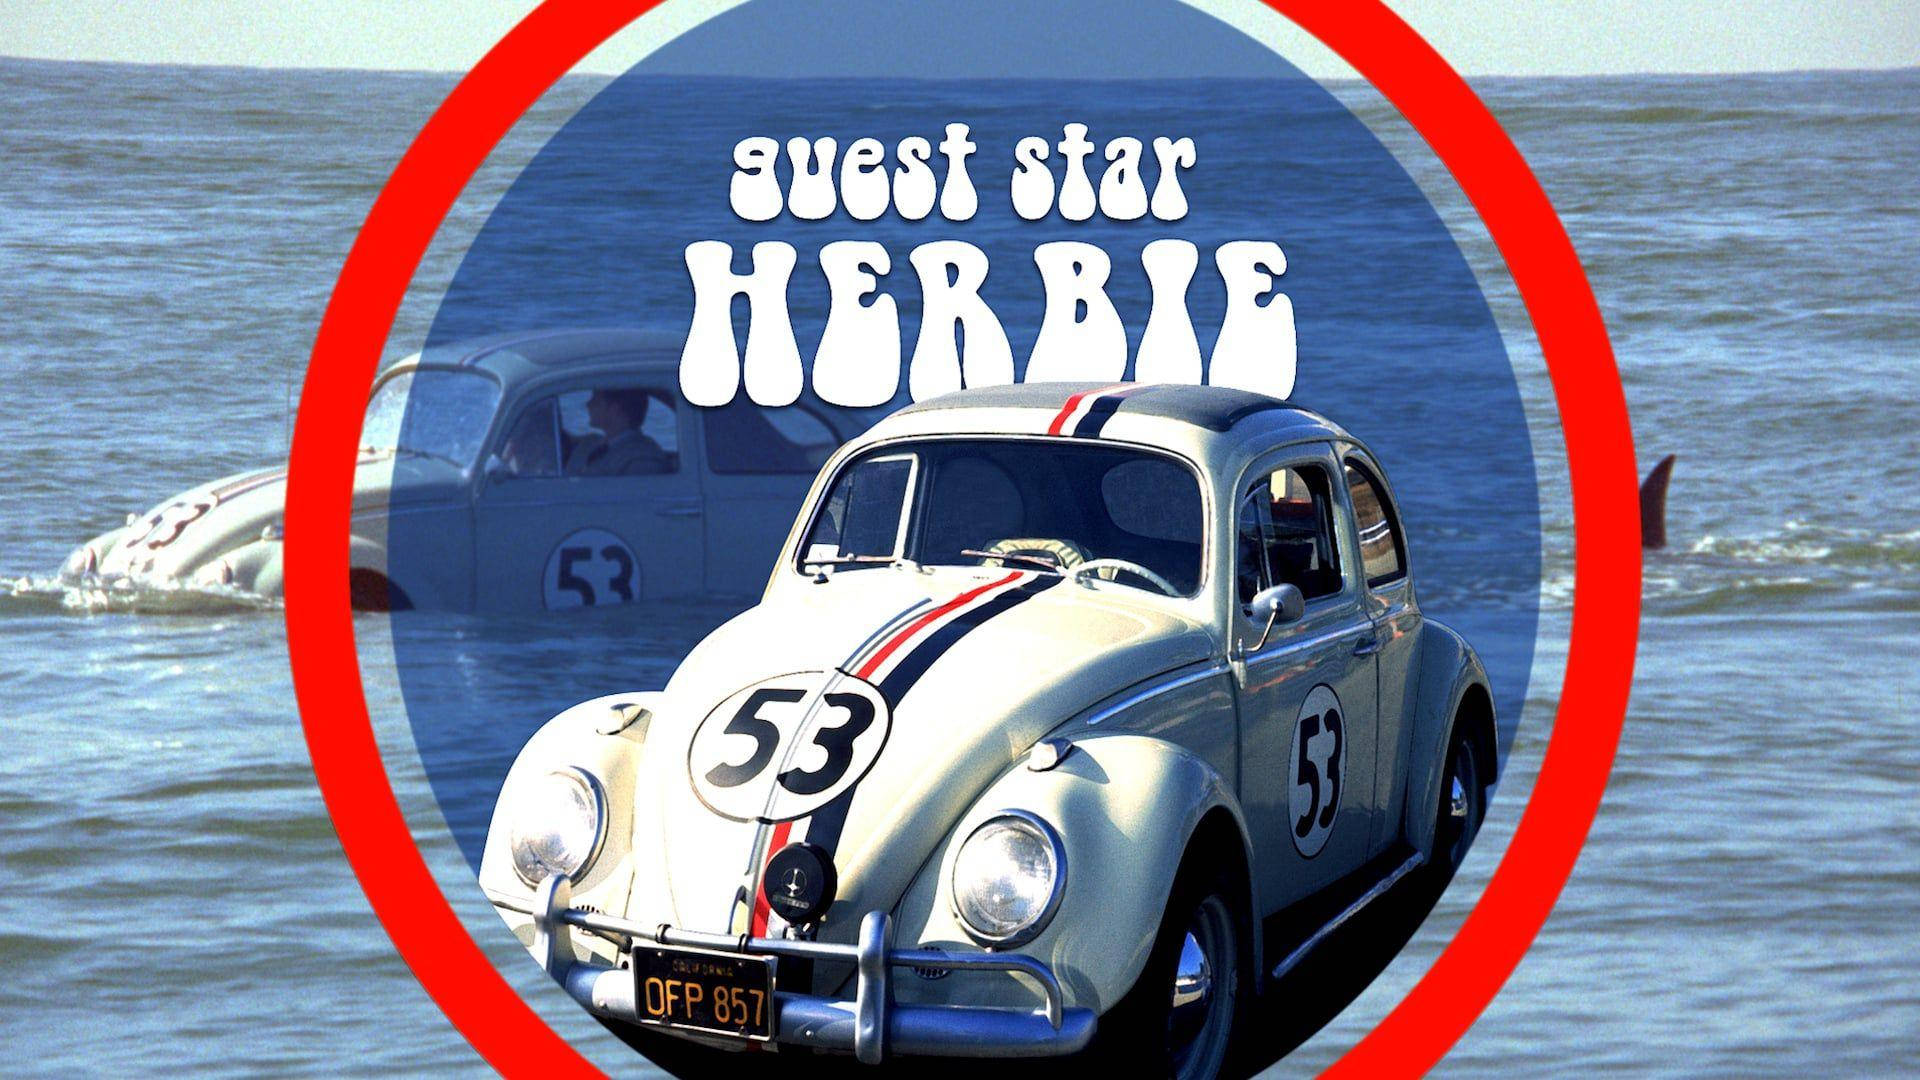 Herbie Fully Loaded Guest Star Background